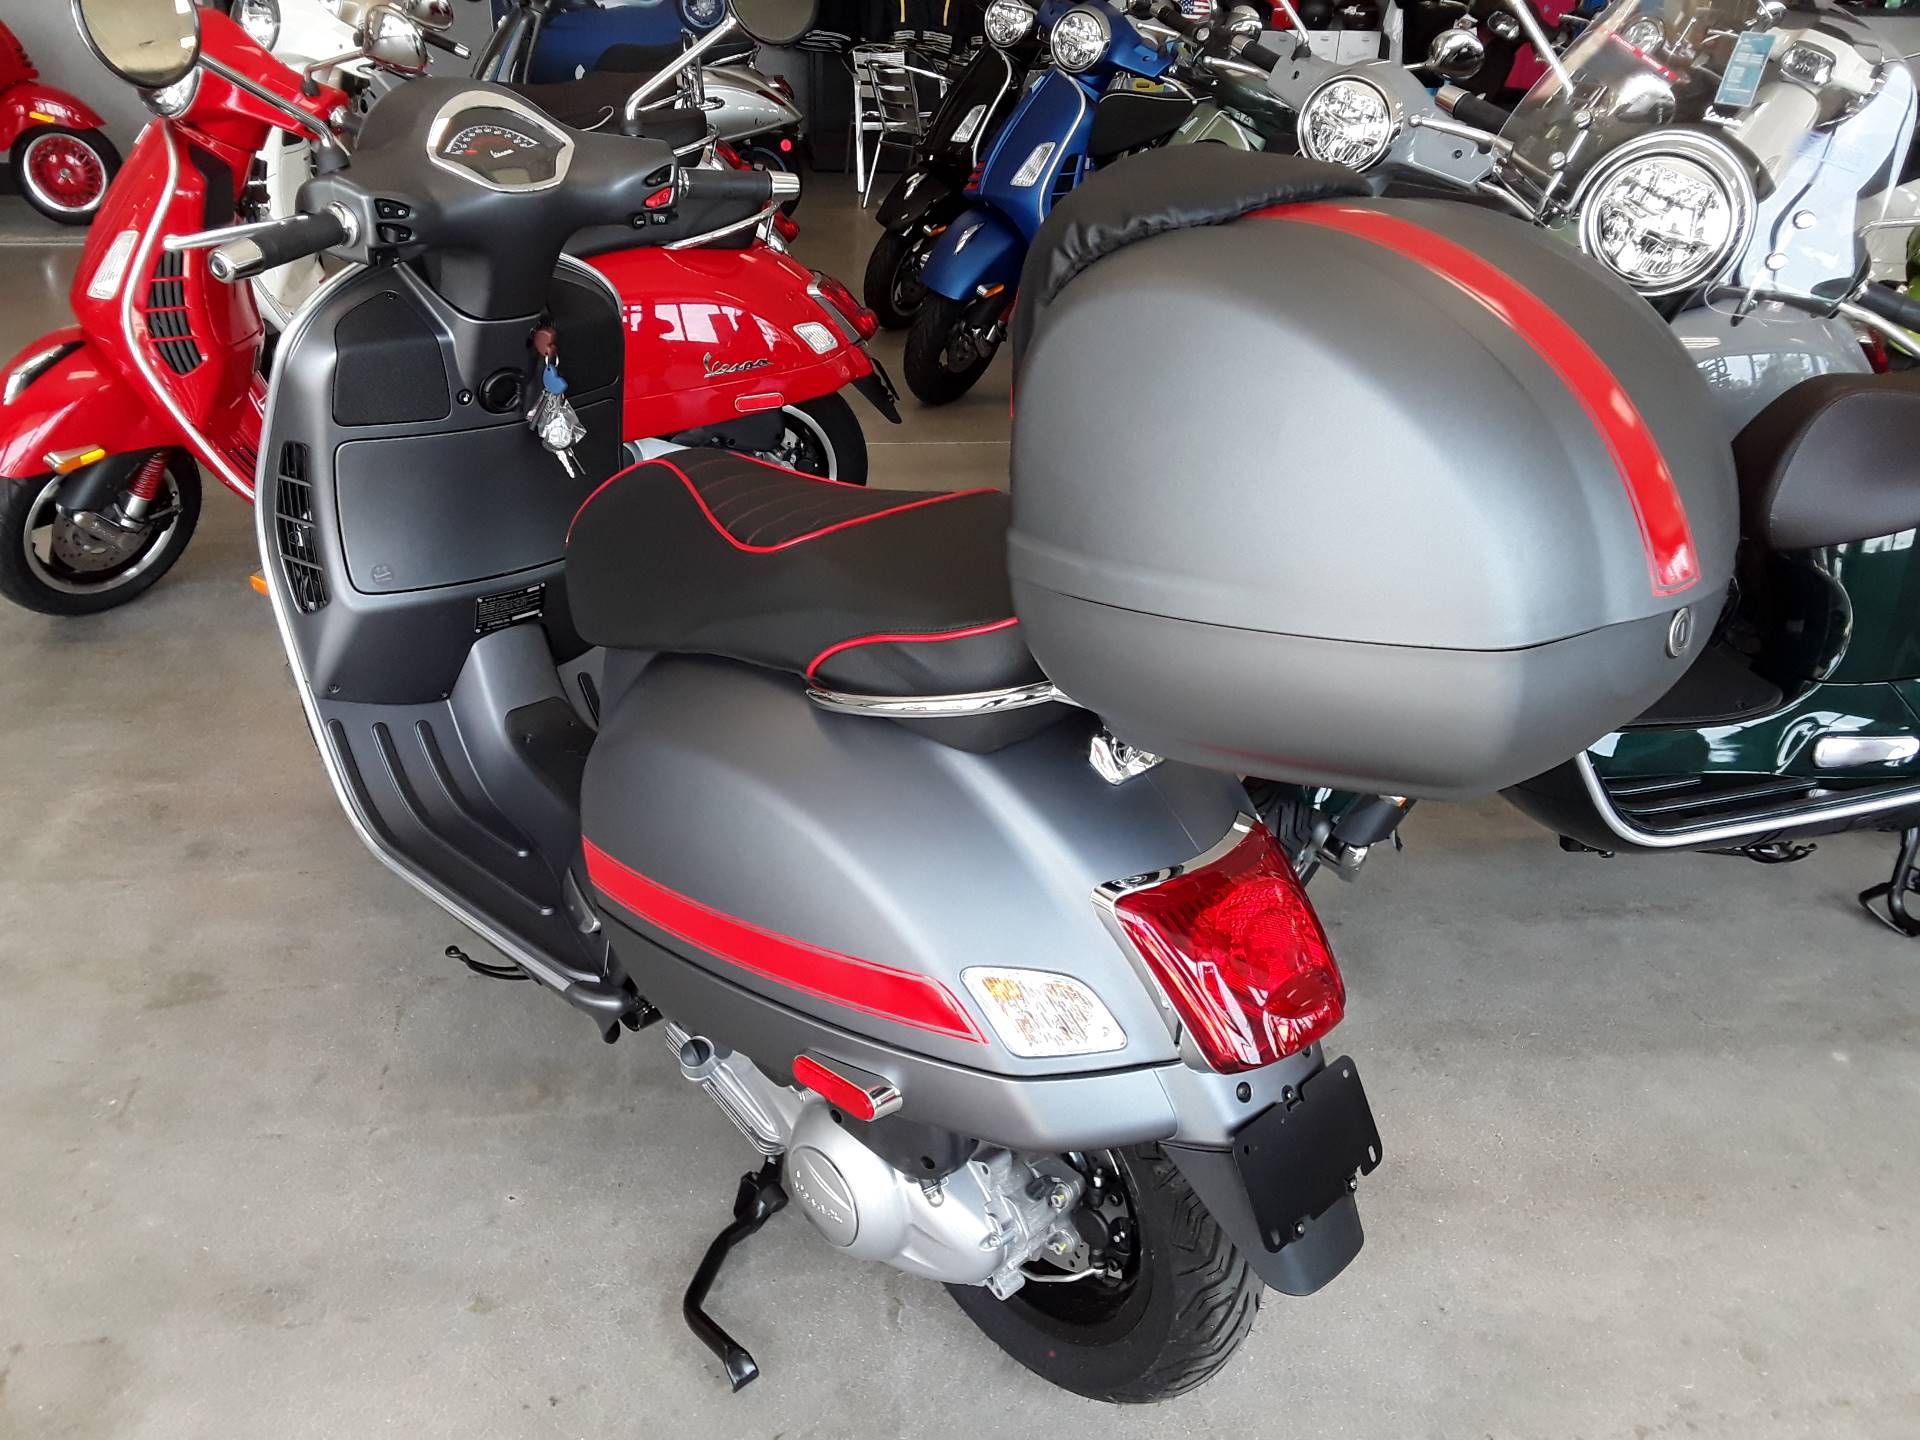 New 2018 Vespa Gts Super Sport 300 Scooters In West Chester